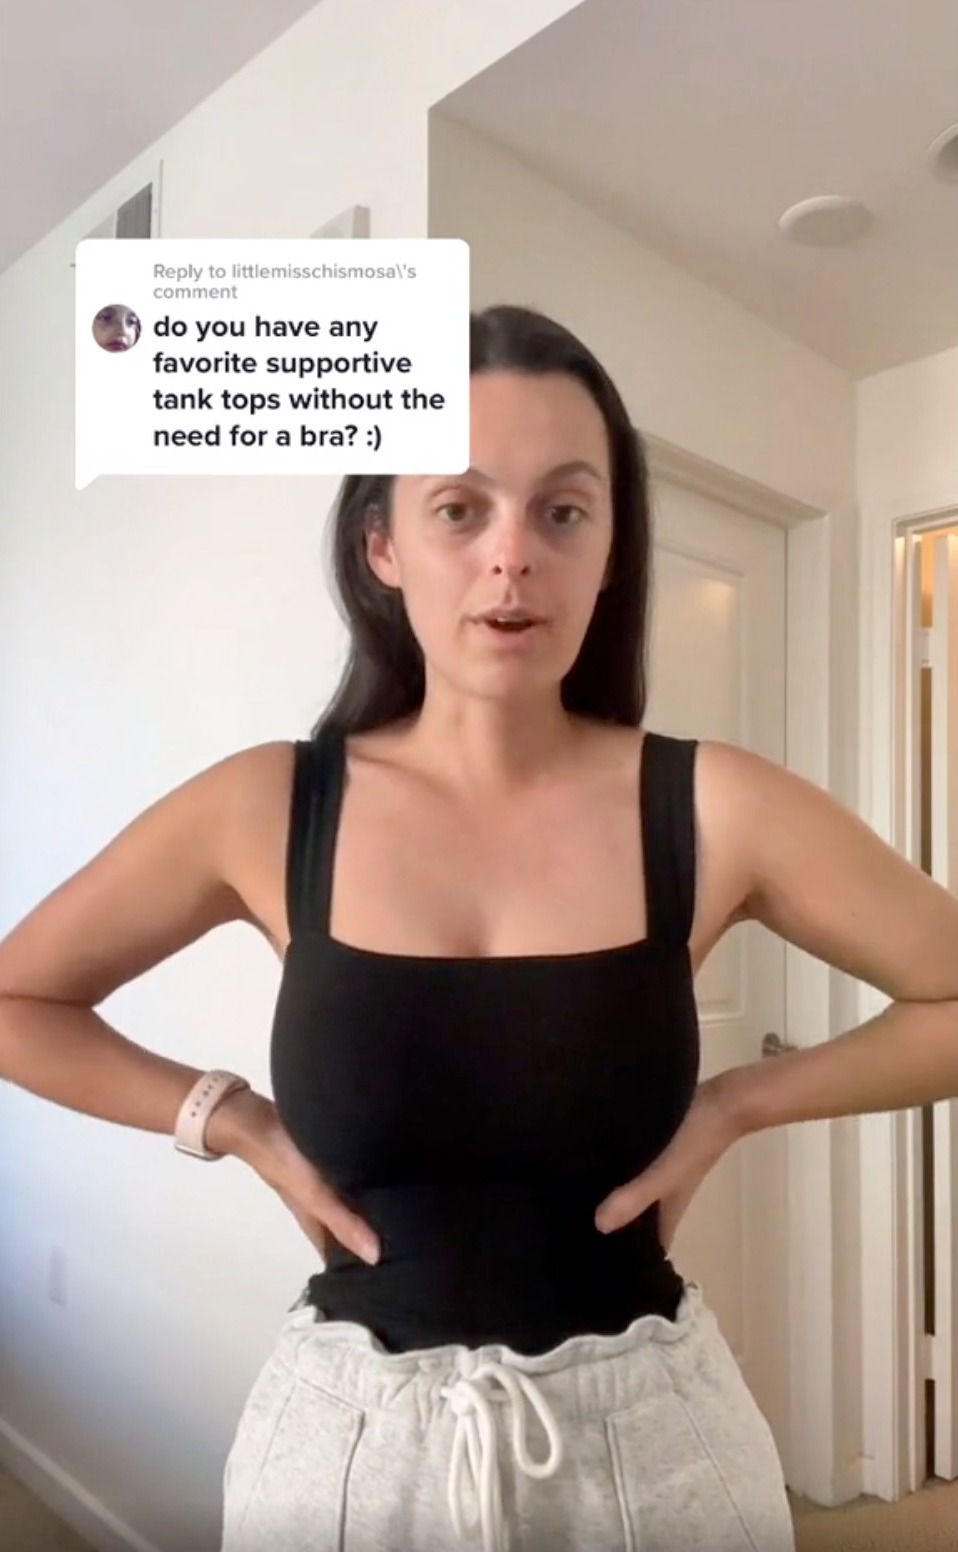 aaron shadow recommends big no bra pic